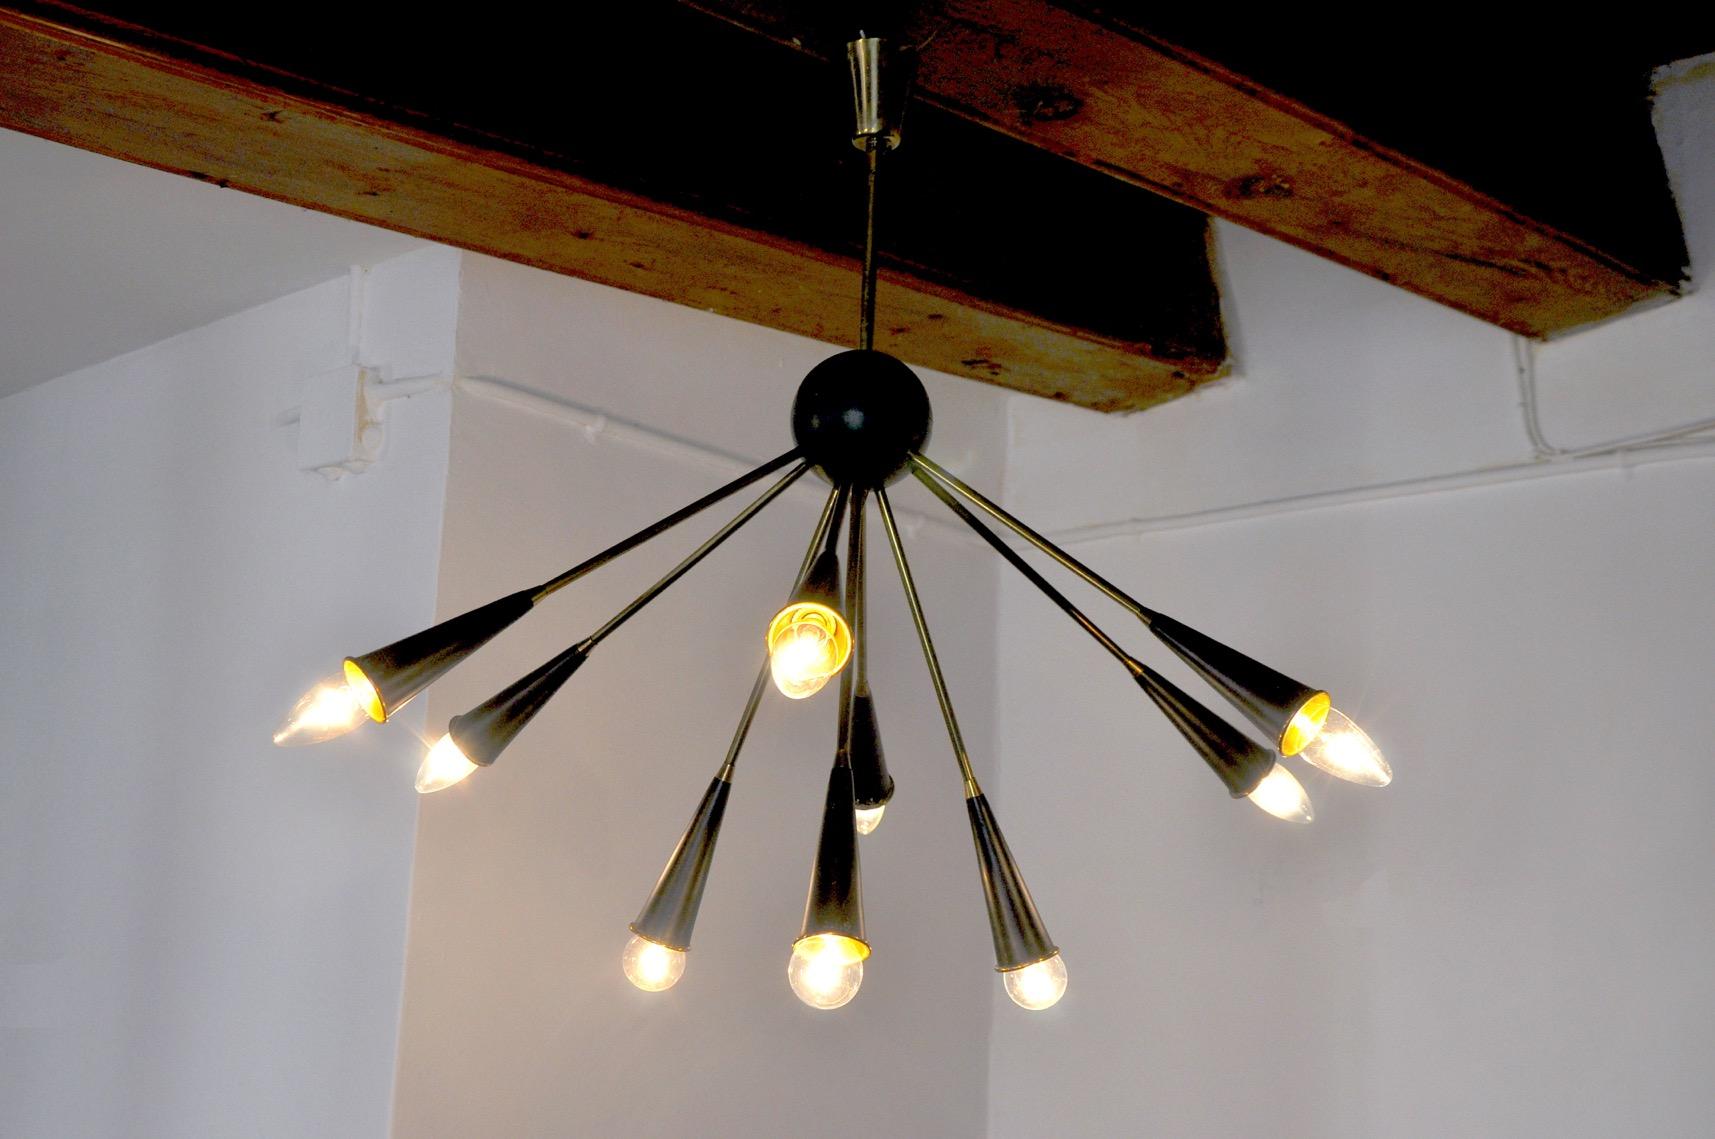 Superb sputnik chandelier in the style of stilonovo, designed and produced in italy around 1960. This chandelier is composed of 9 arms, a brass structure painted black. Rare design object that will illuminate your interior wonderfully. Electricity